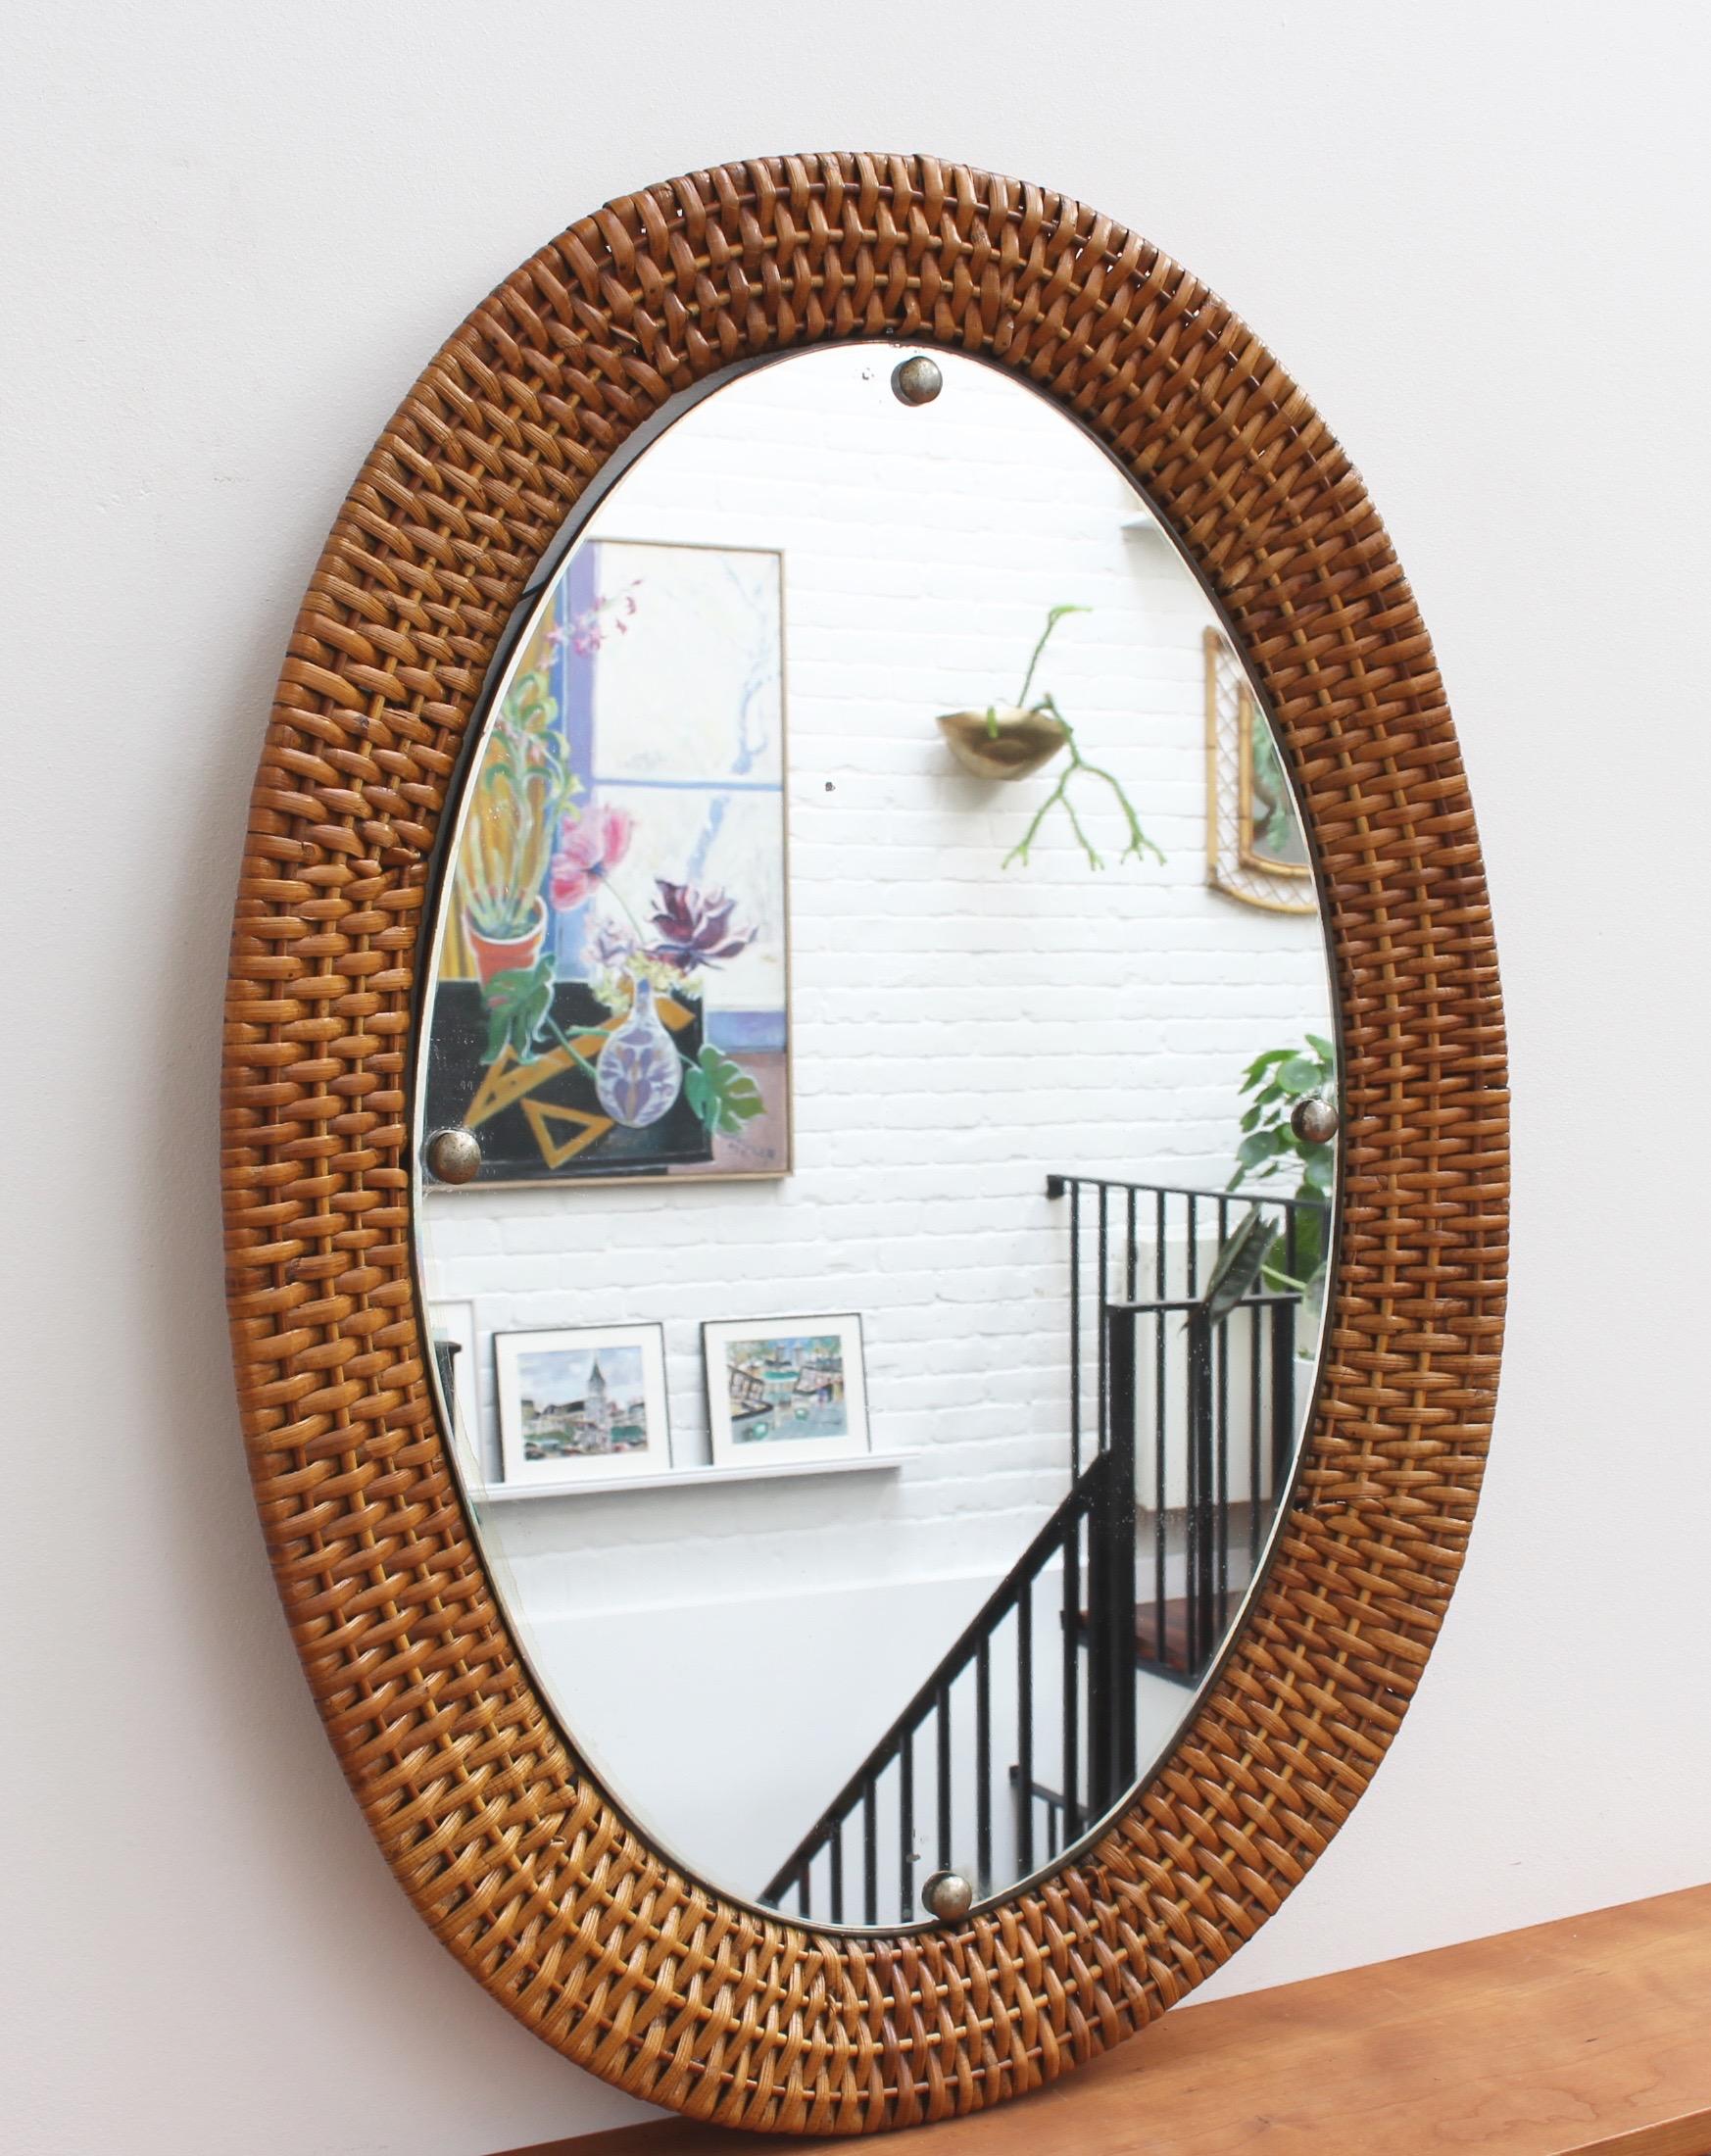 Italian wicker rattan wall mirror (circa 1960s). A distinctive vintage mirror which transports you immediately to another place and another time, perhaps the Italian Riviera or Miami's South Beach circa 1960. Its substantial glass is oval-shaped,